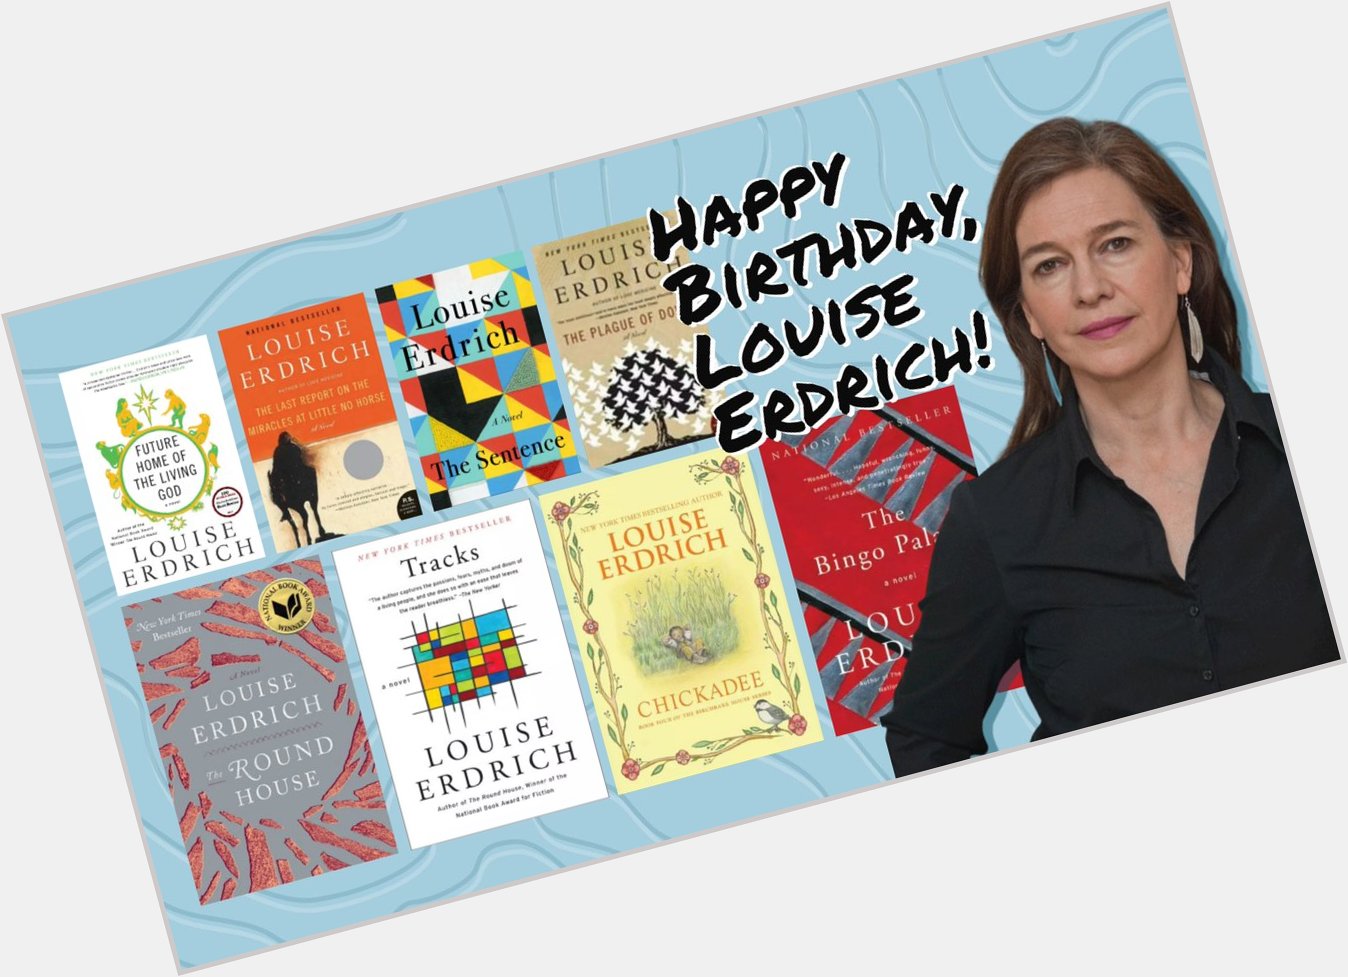 Happy birthday Louise Erdrich! Learn more about her work here:  